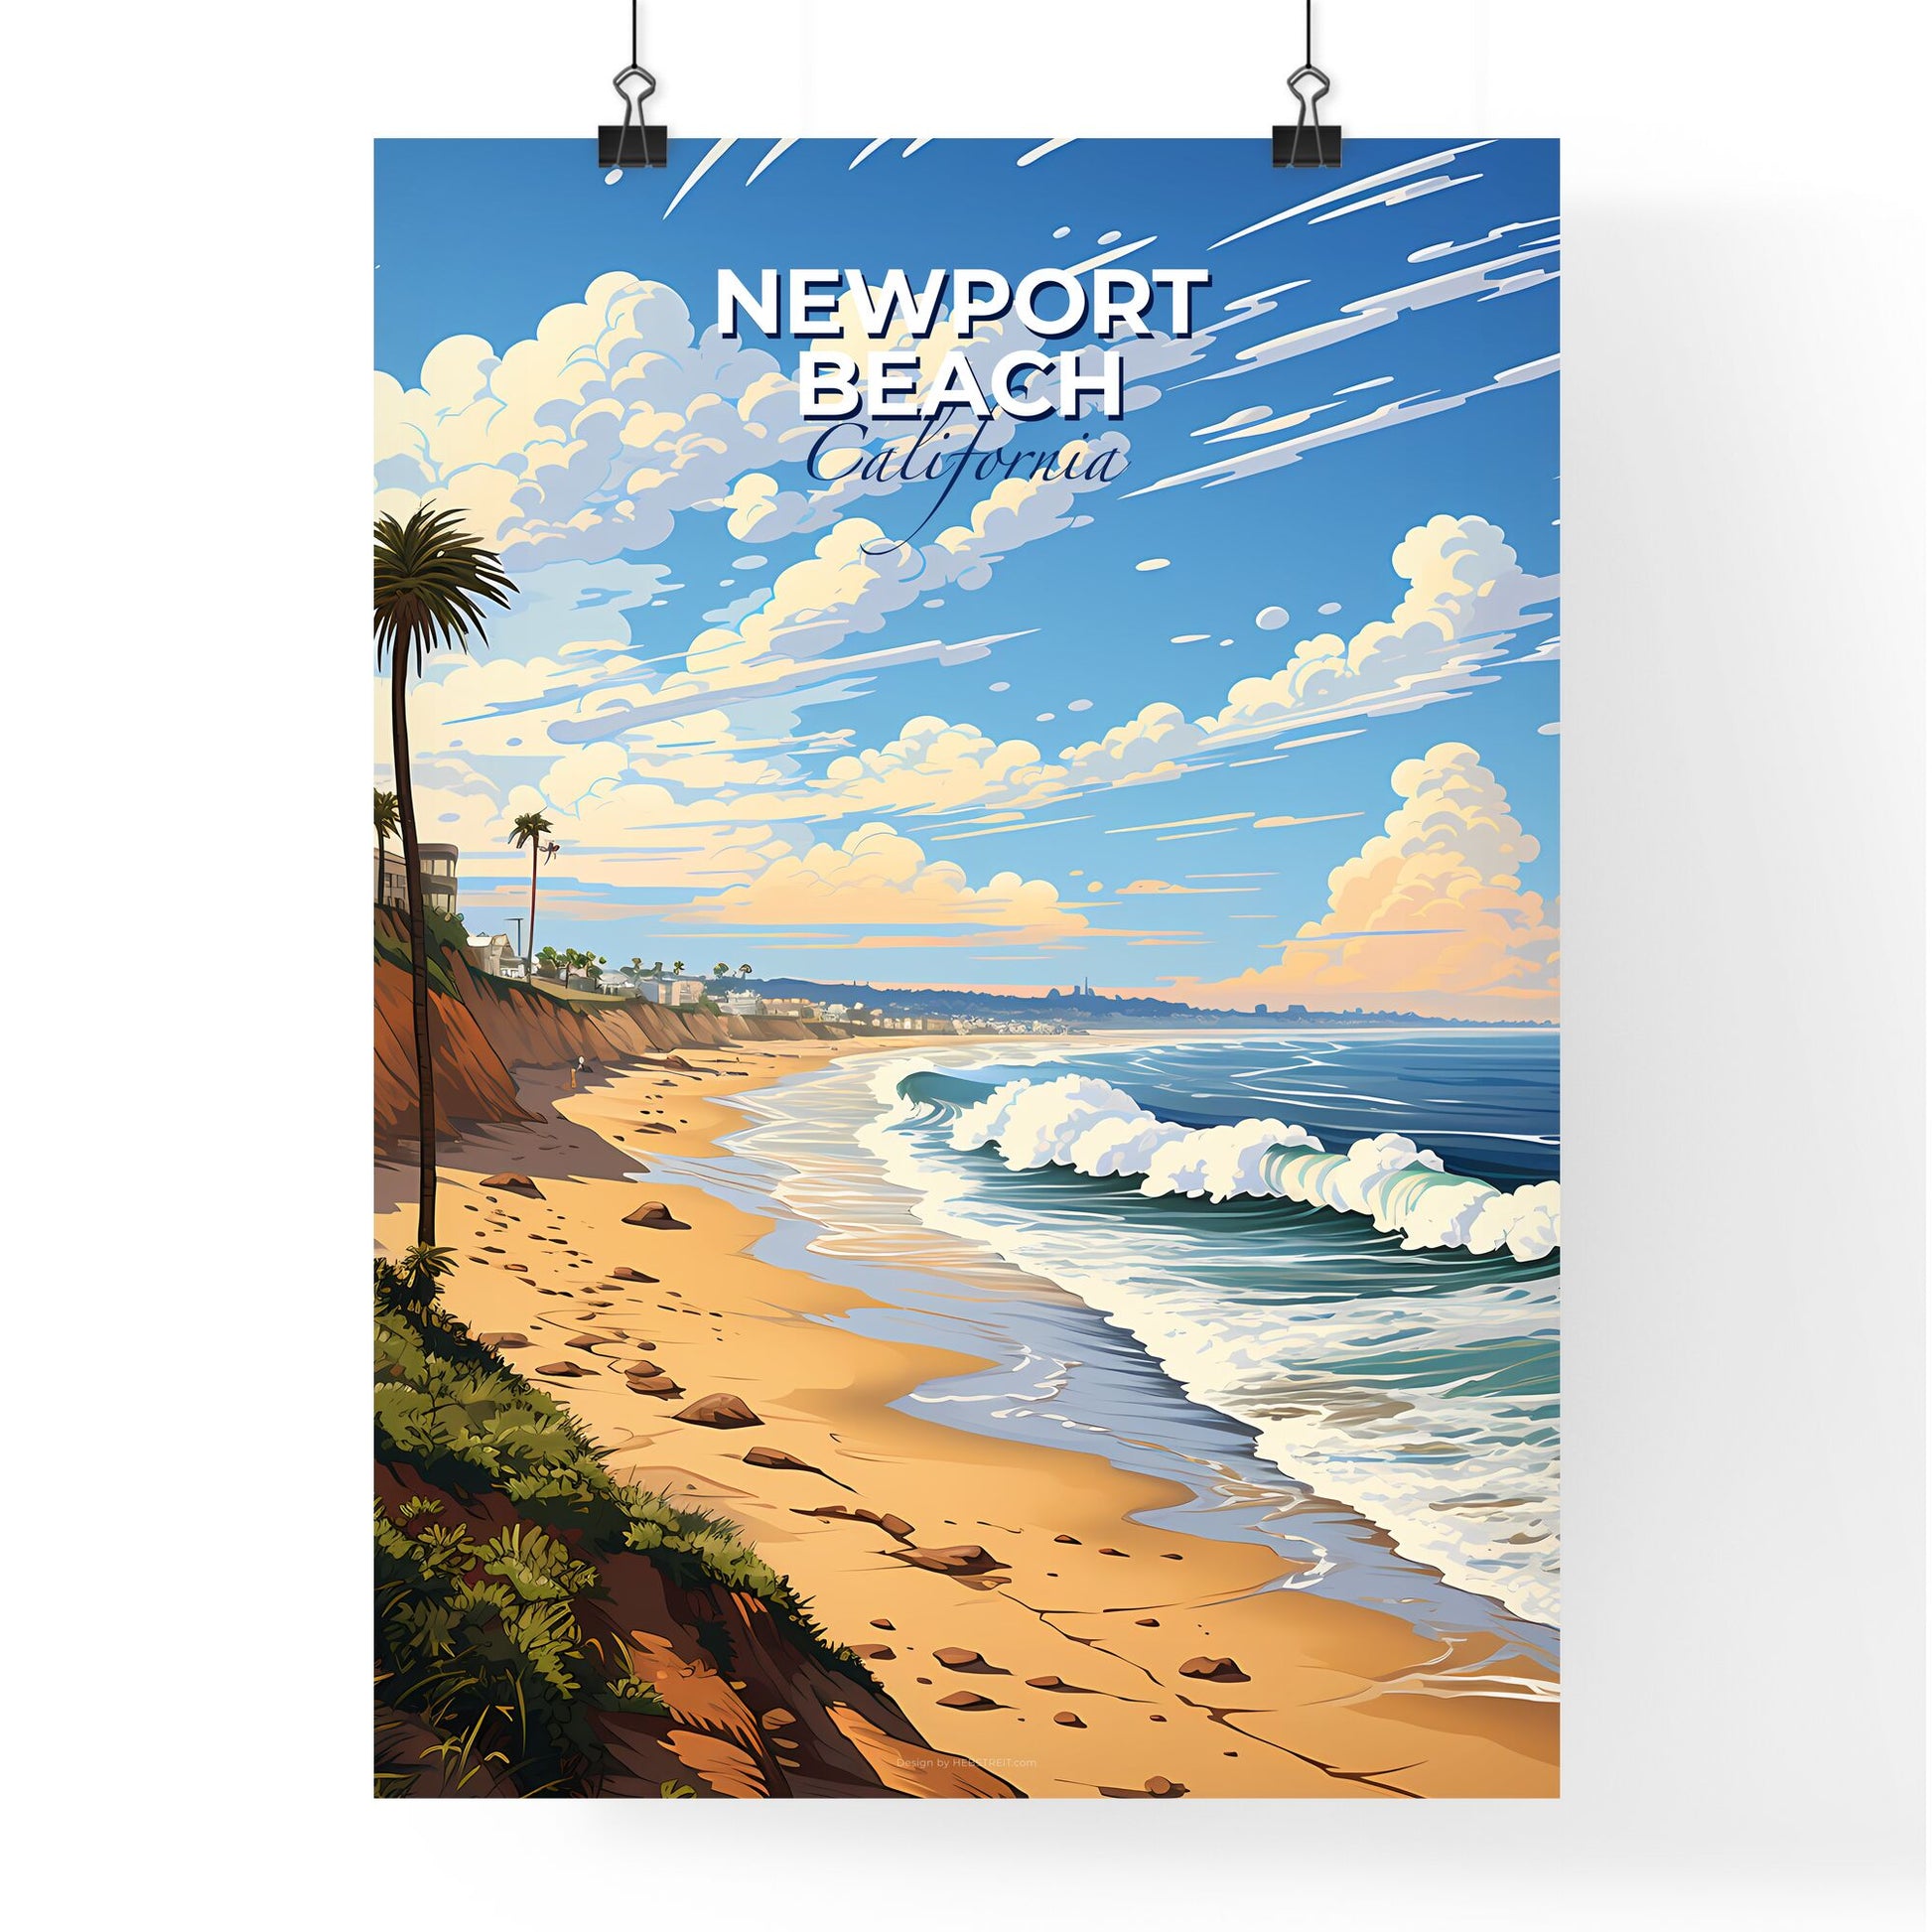 Newport Beach, California, A Poster of a beach with palm trees and waves Default Title